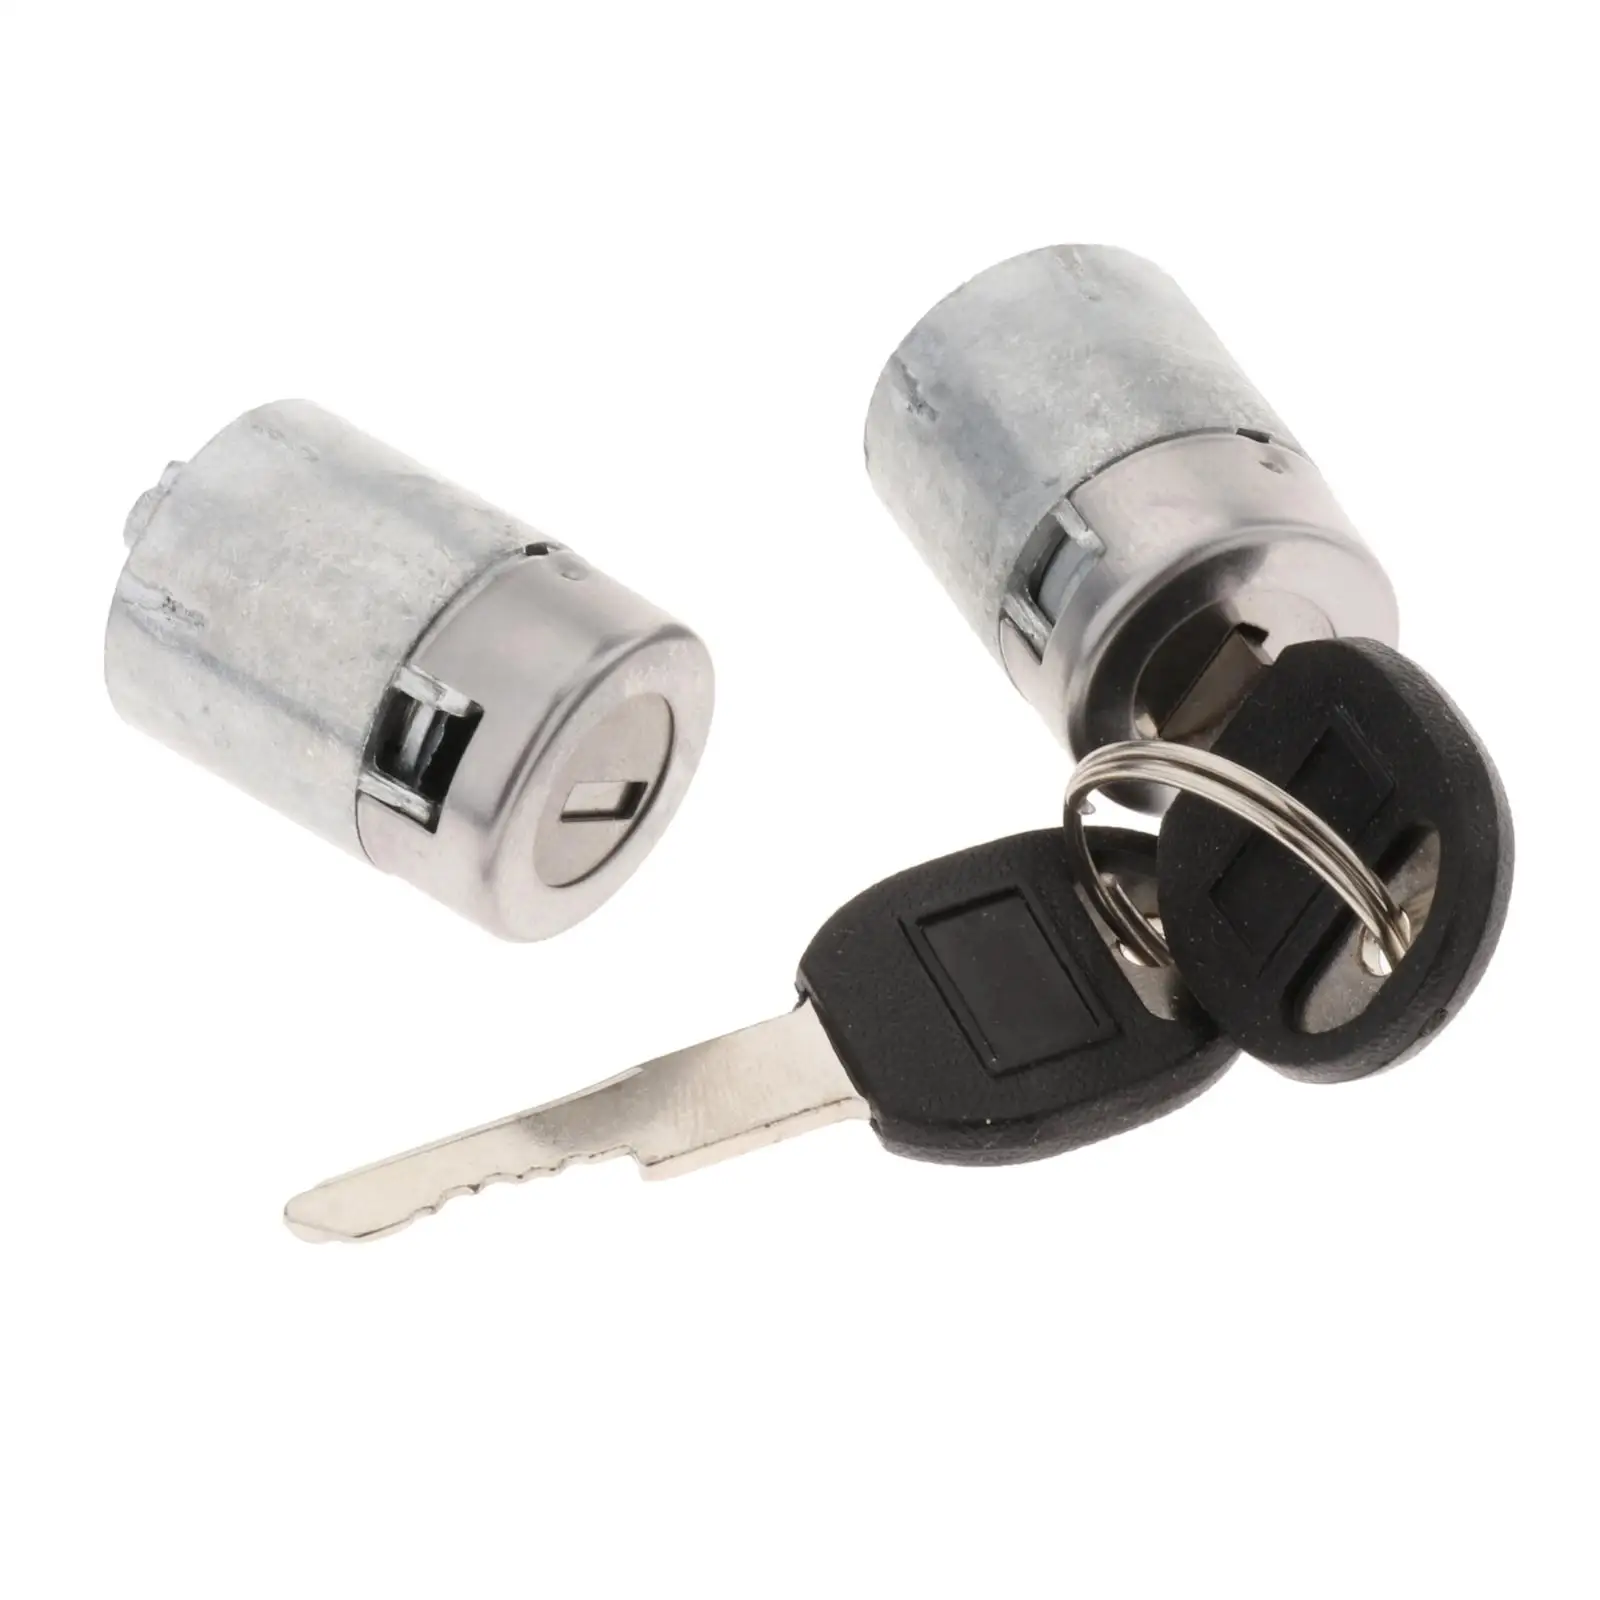 2 Pieces Door Lock Cylinder Set with Keys 057100275 Fit for Chevy C1500 1995-99 Accessory